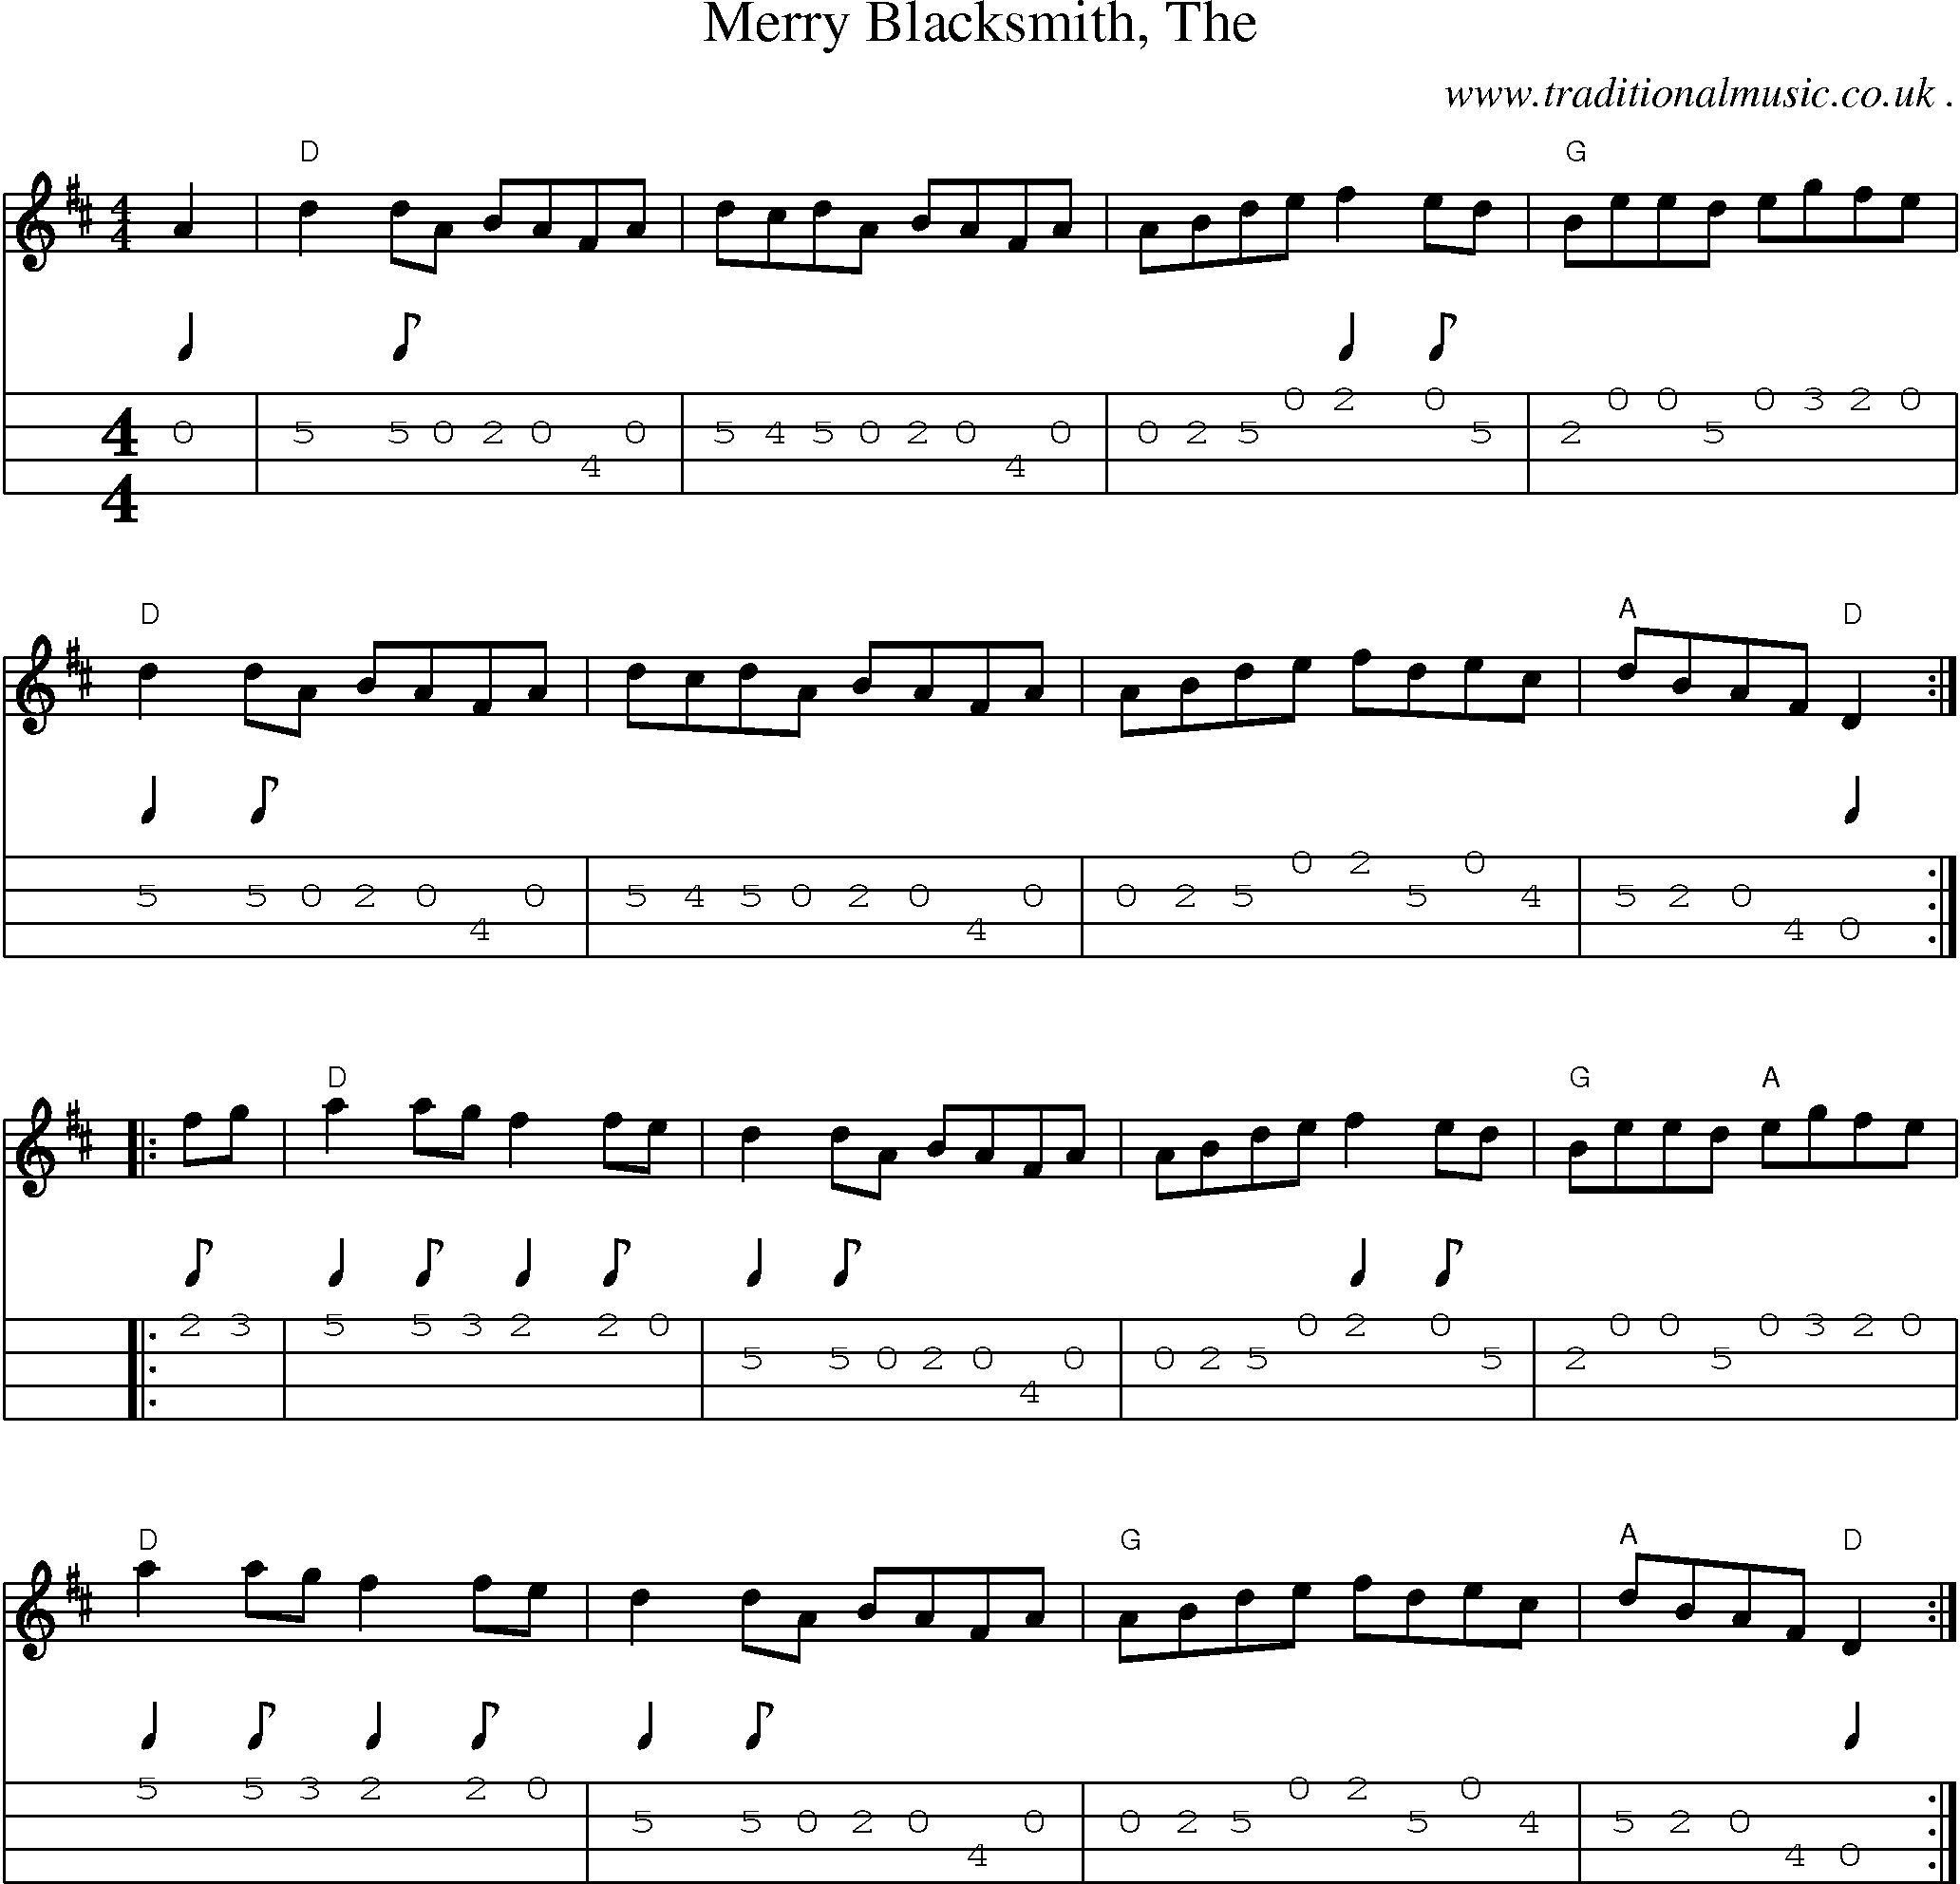 Music Score and Guitar Tabs for Merry Blacksmith The1